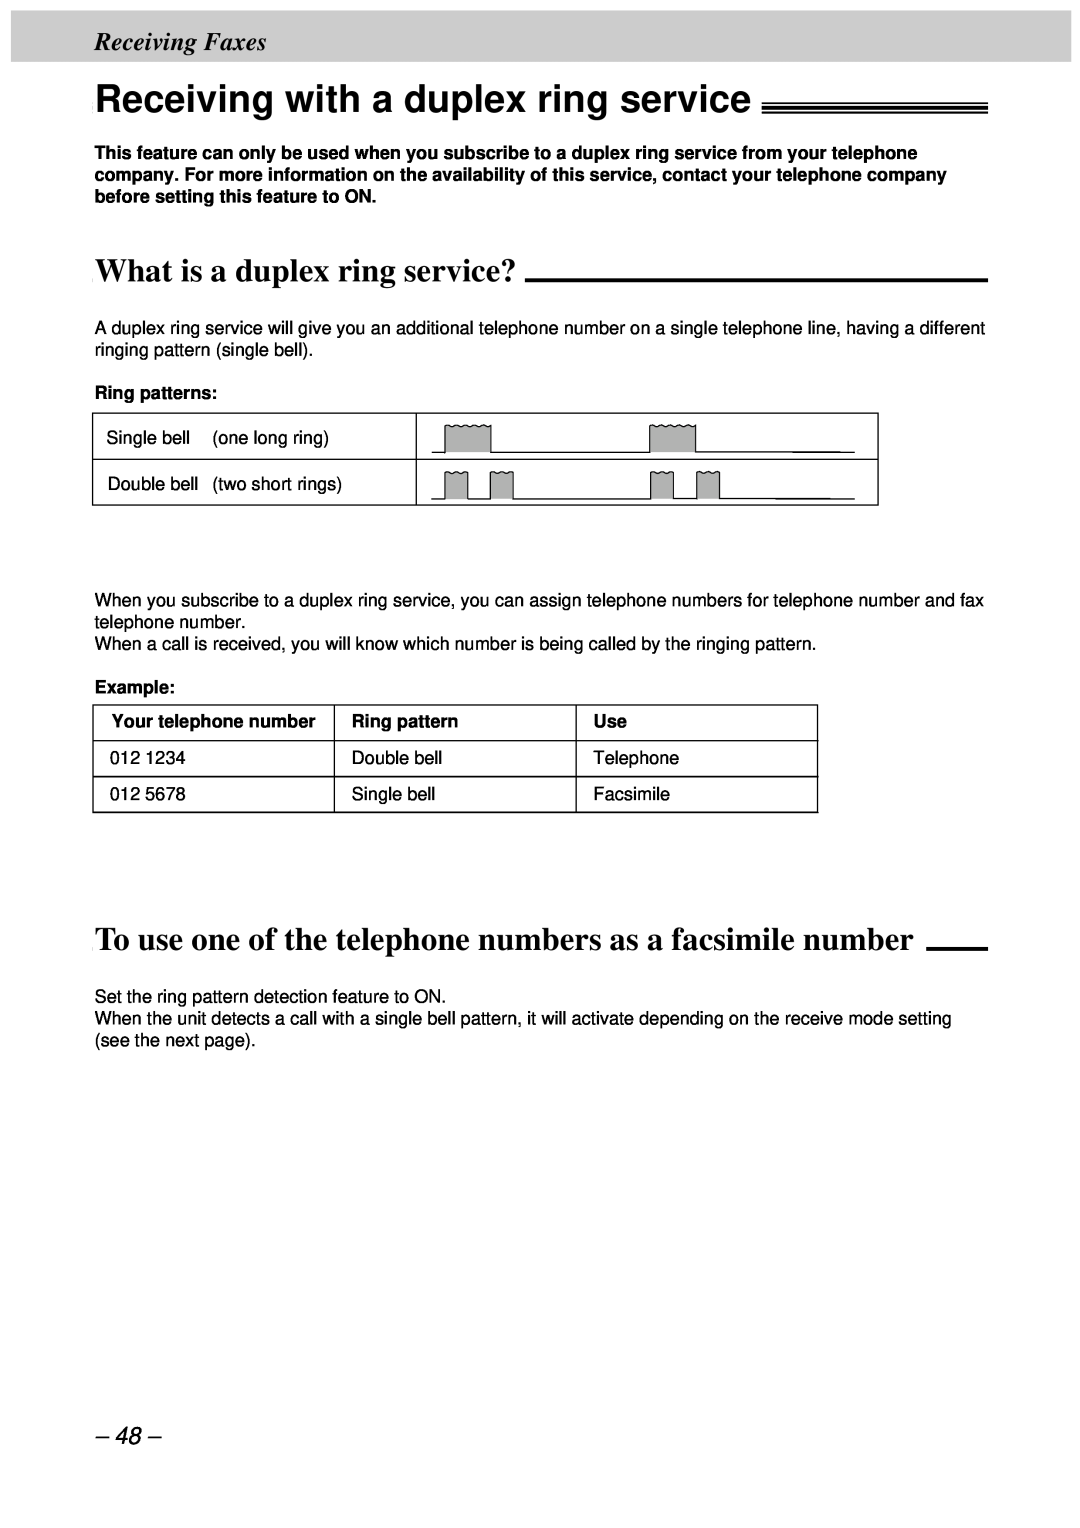 Panasonic KX-FT33HK, KX-FT34HK Receiving with a duplex ring service, What is a duplex ring service?, Receiving Faxes 